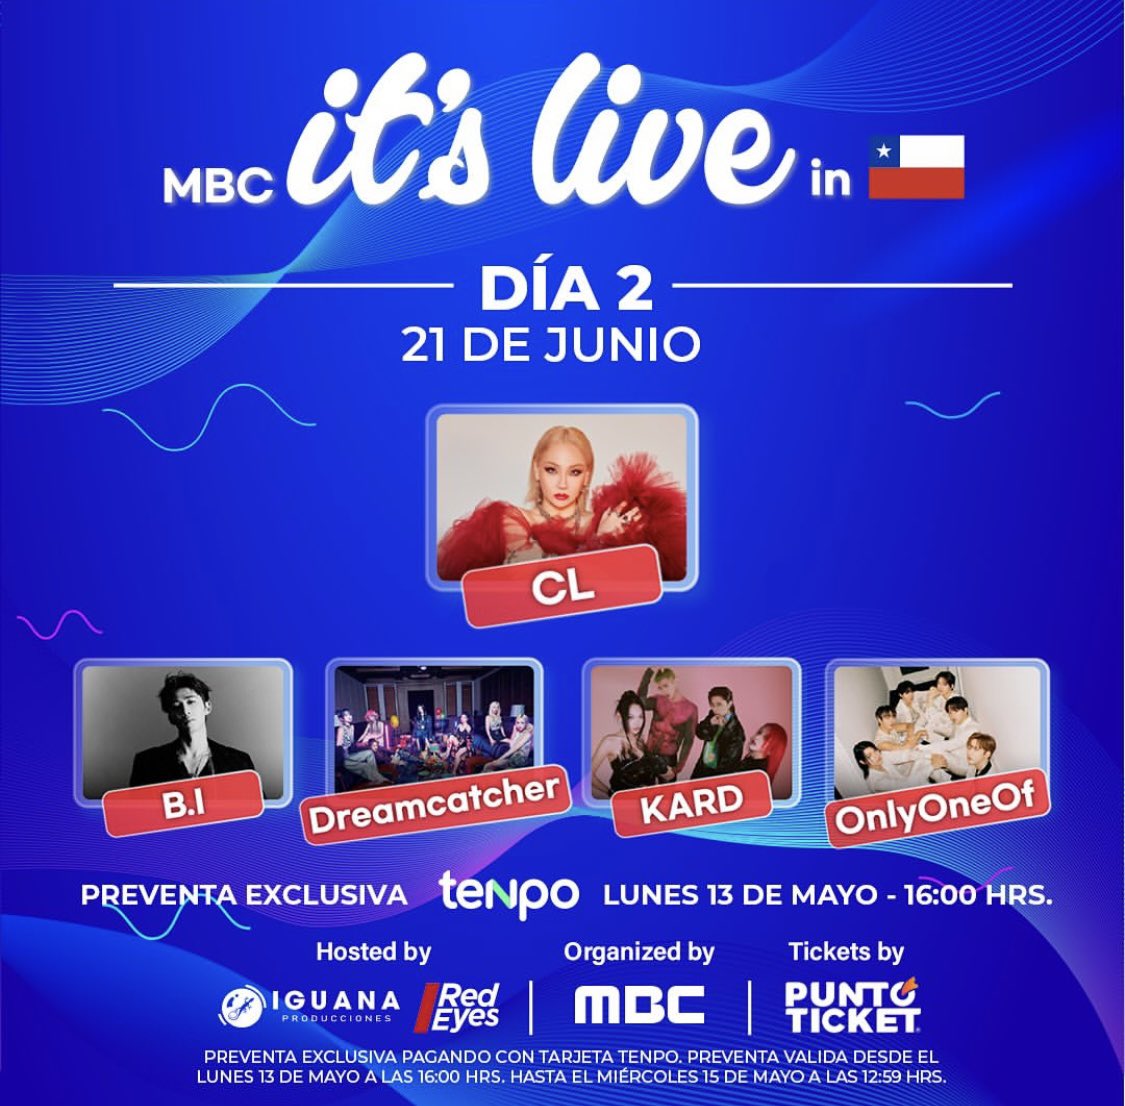 .@KARD_Official was confirmed on the 2nd day of 'MBC it's Live in Chile', which will take place on June 21st!

#KARD #카드